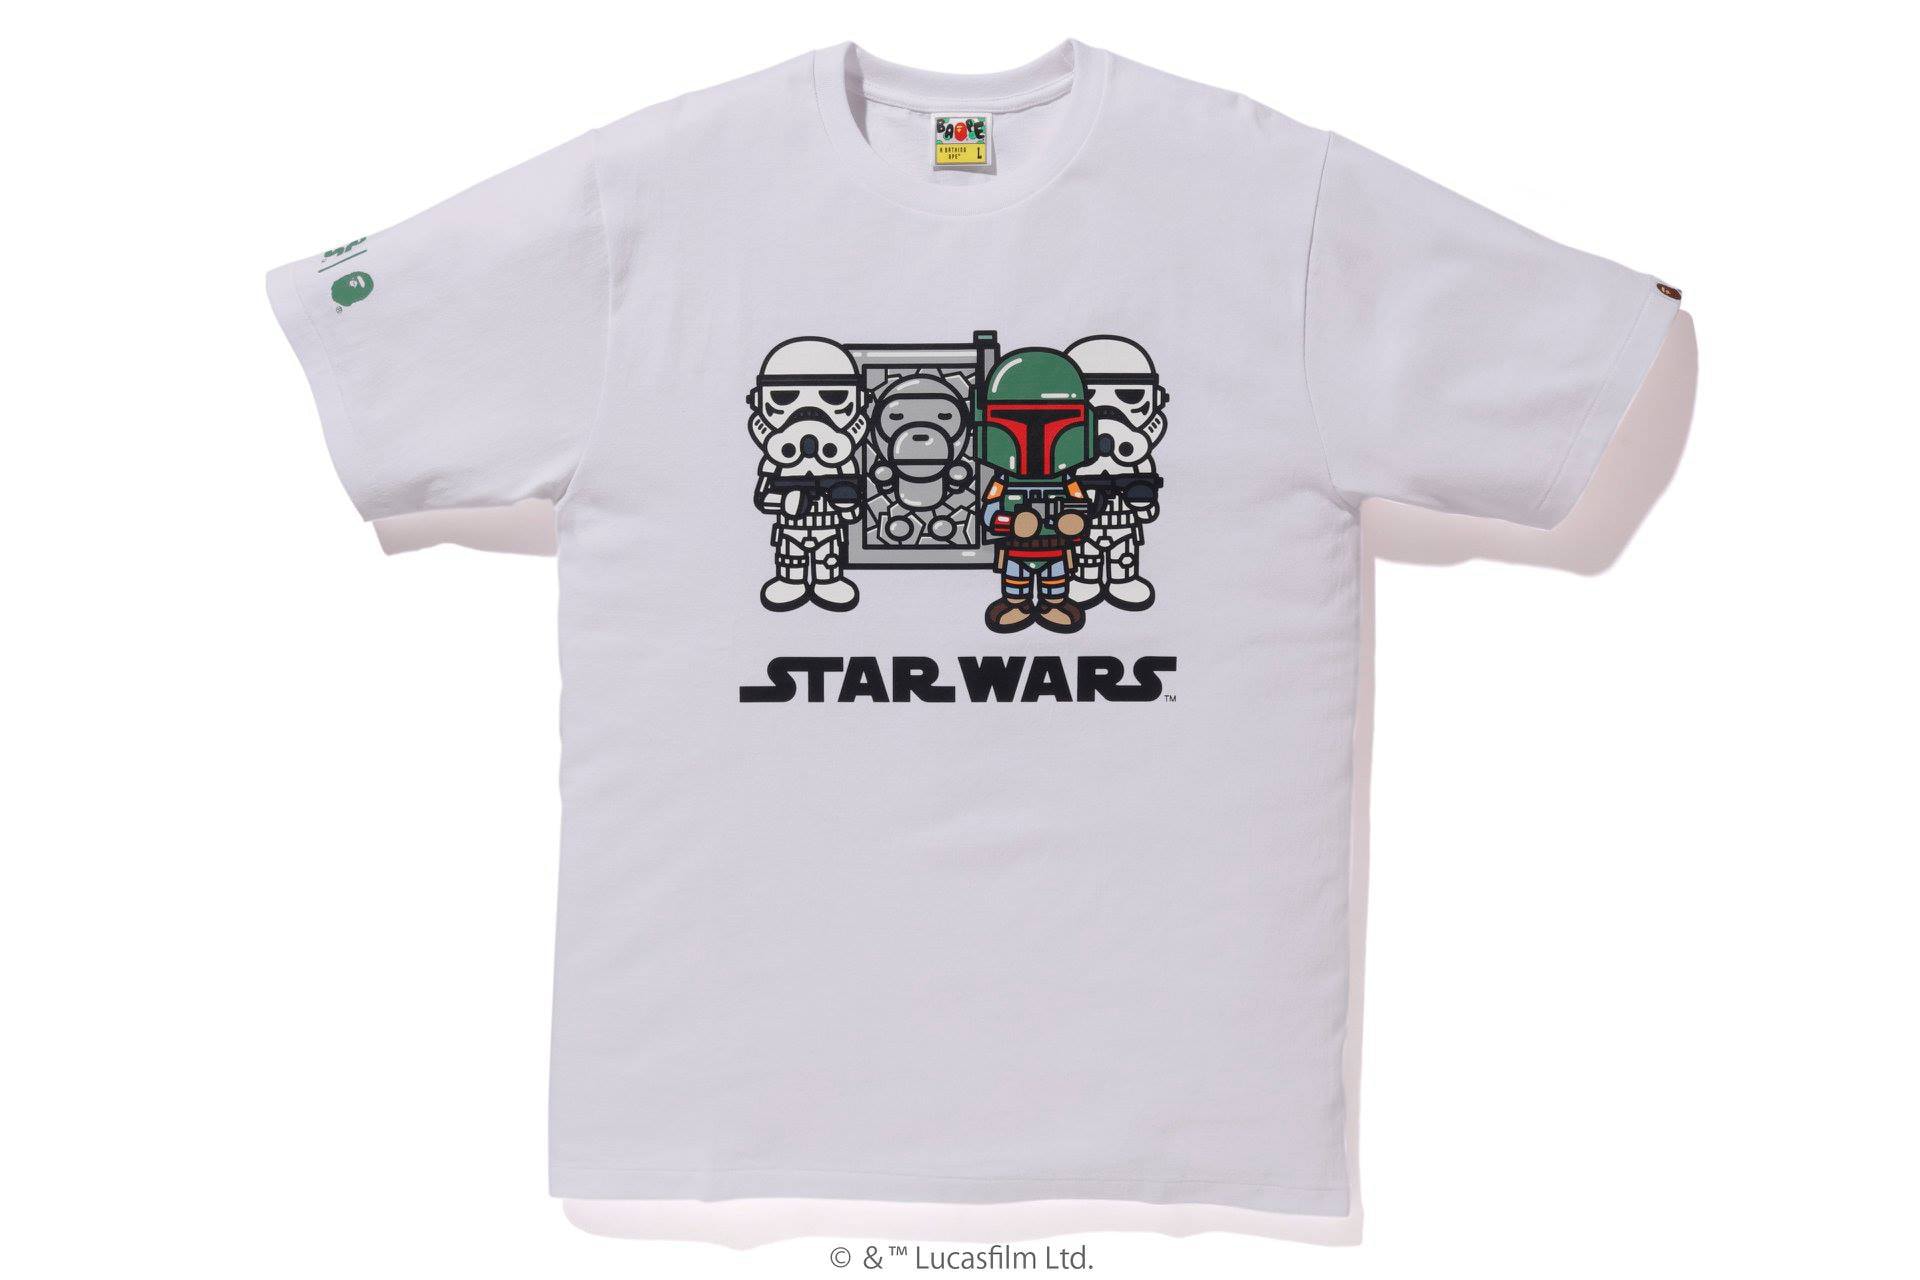 BAPE Teases New Star Wars The Mandalorian Collaborative Capsule baby milo the rise of skywalker collaborations lucasfilms 